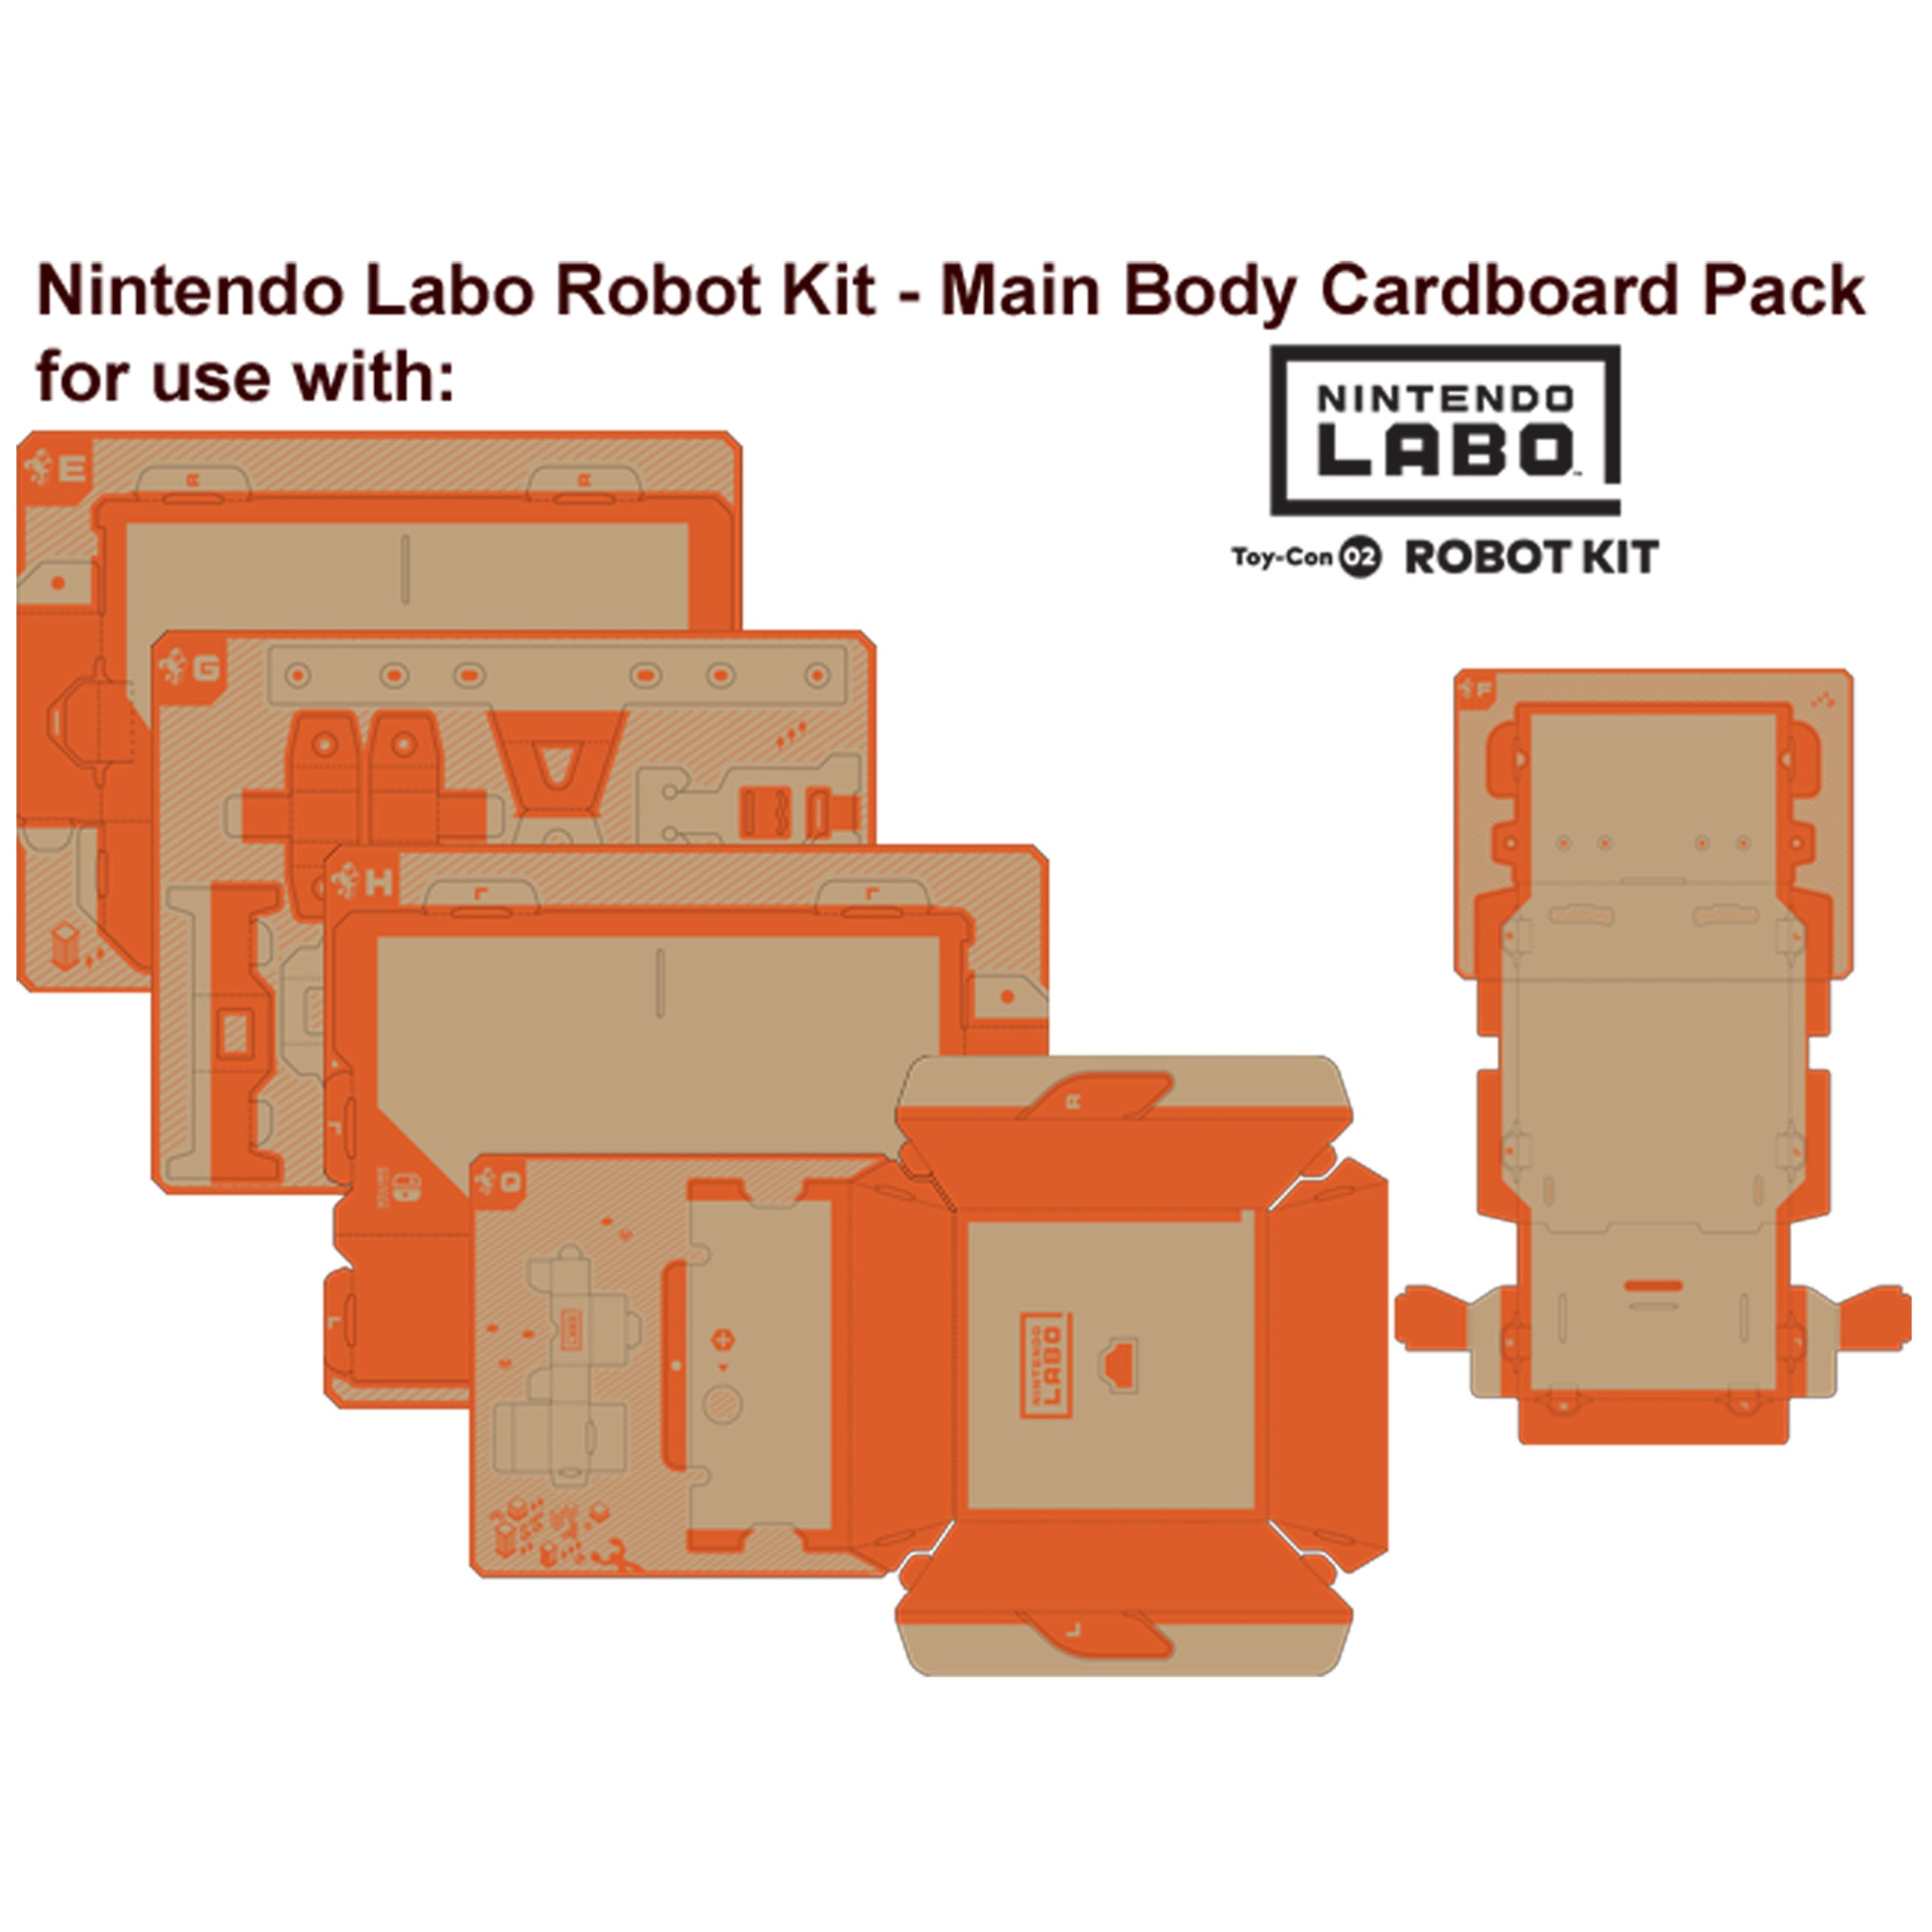 How to print your own Nintendo Labo replacement parts for free